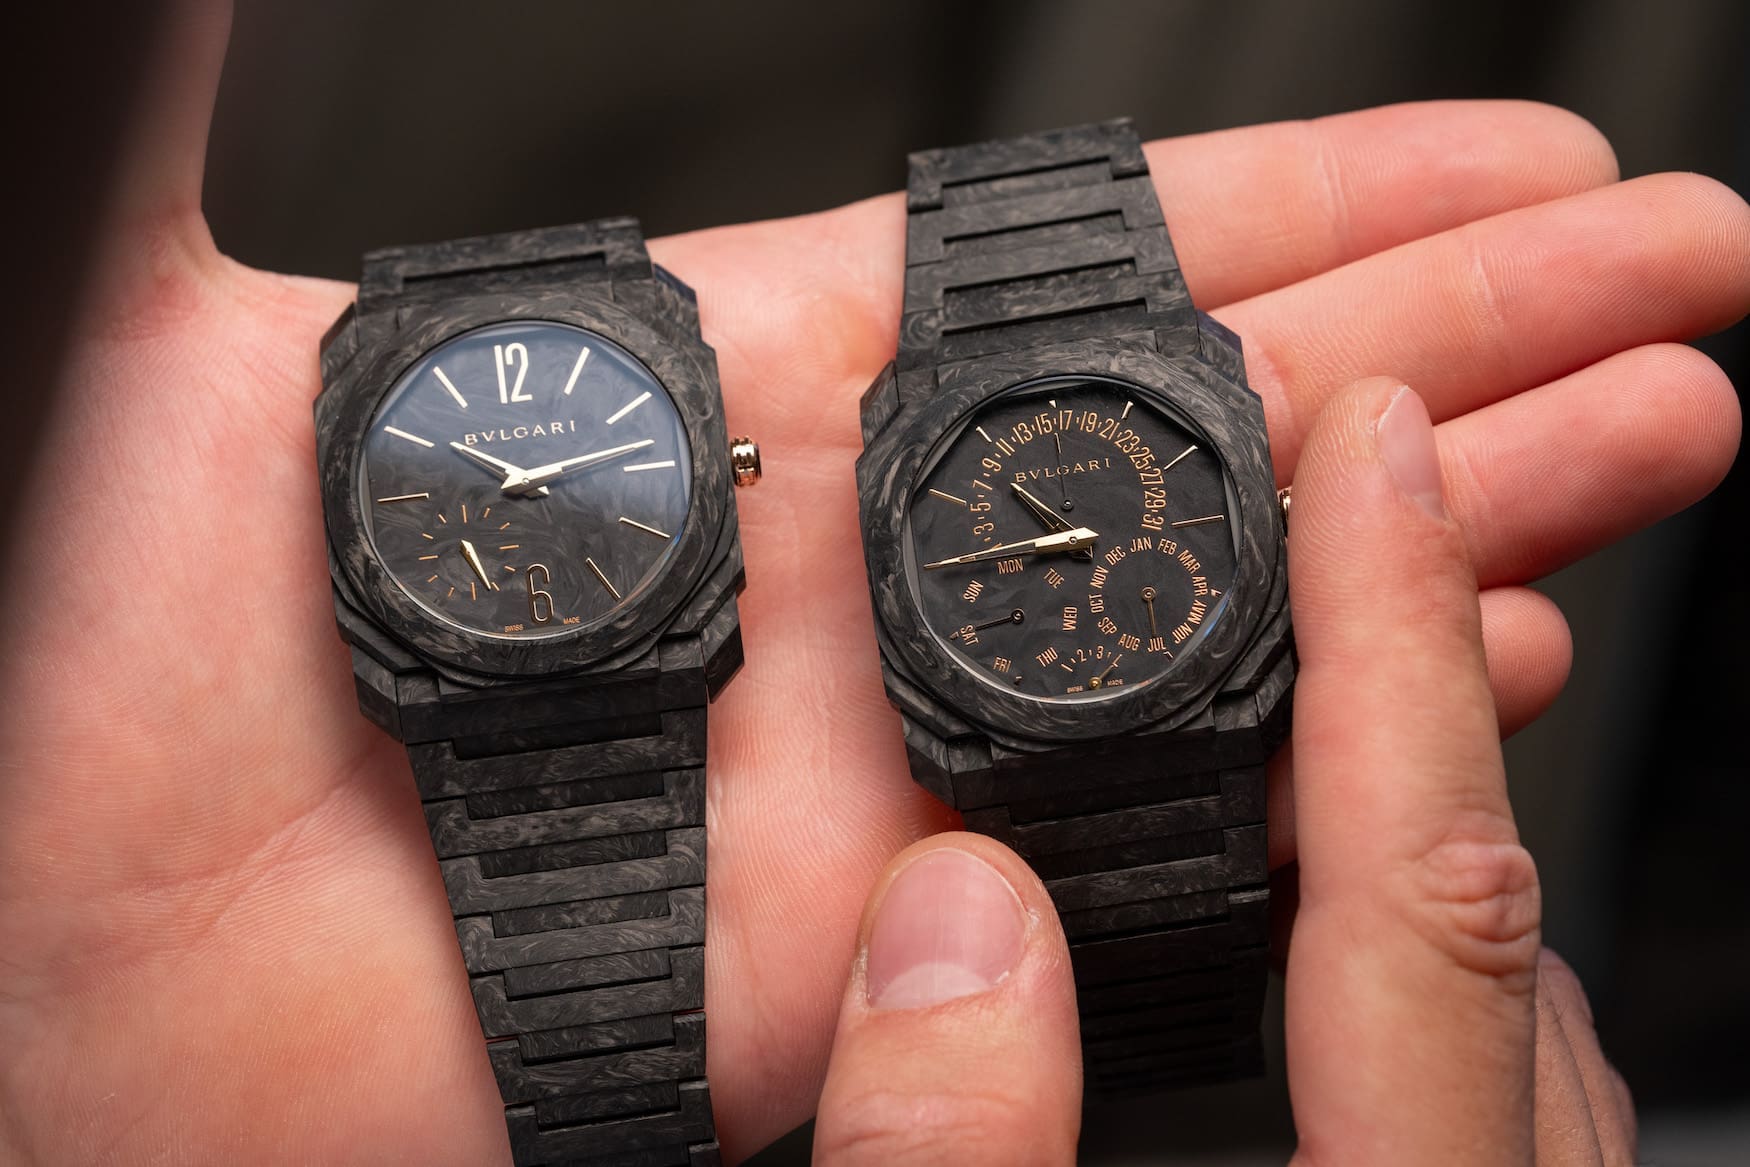 Bulgari Octo Finissimo CarbonGold side by side